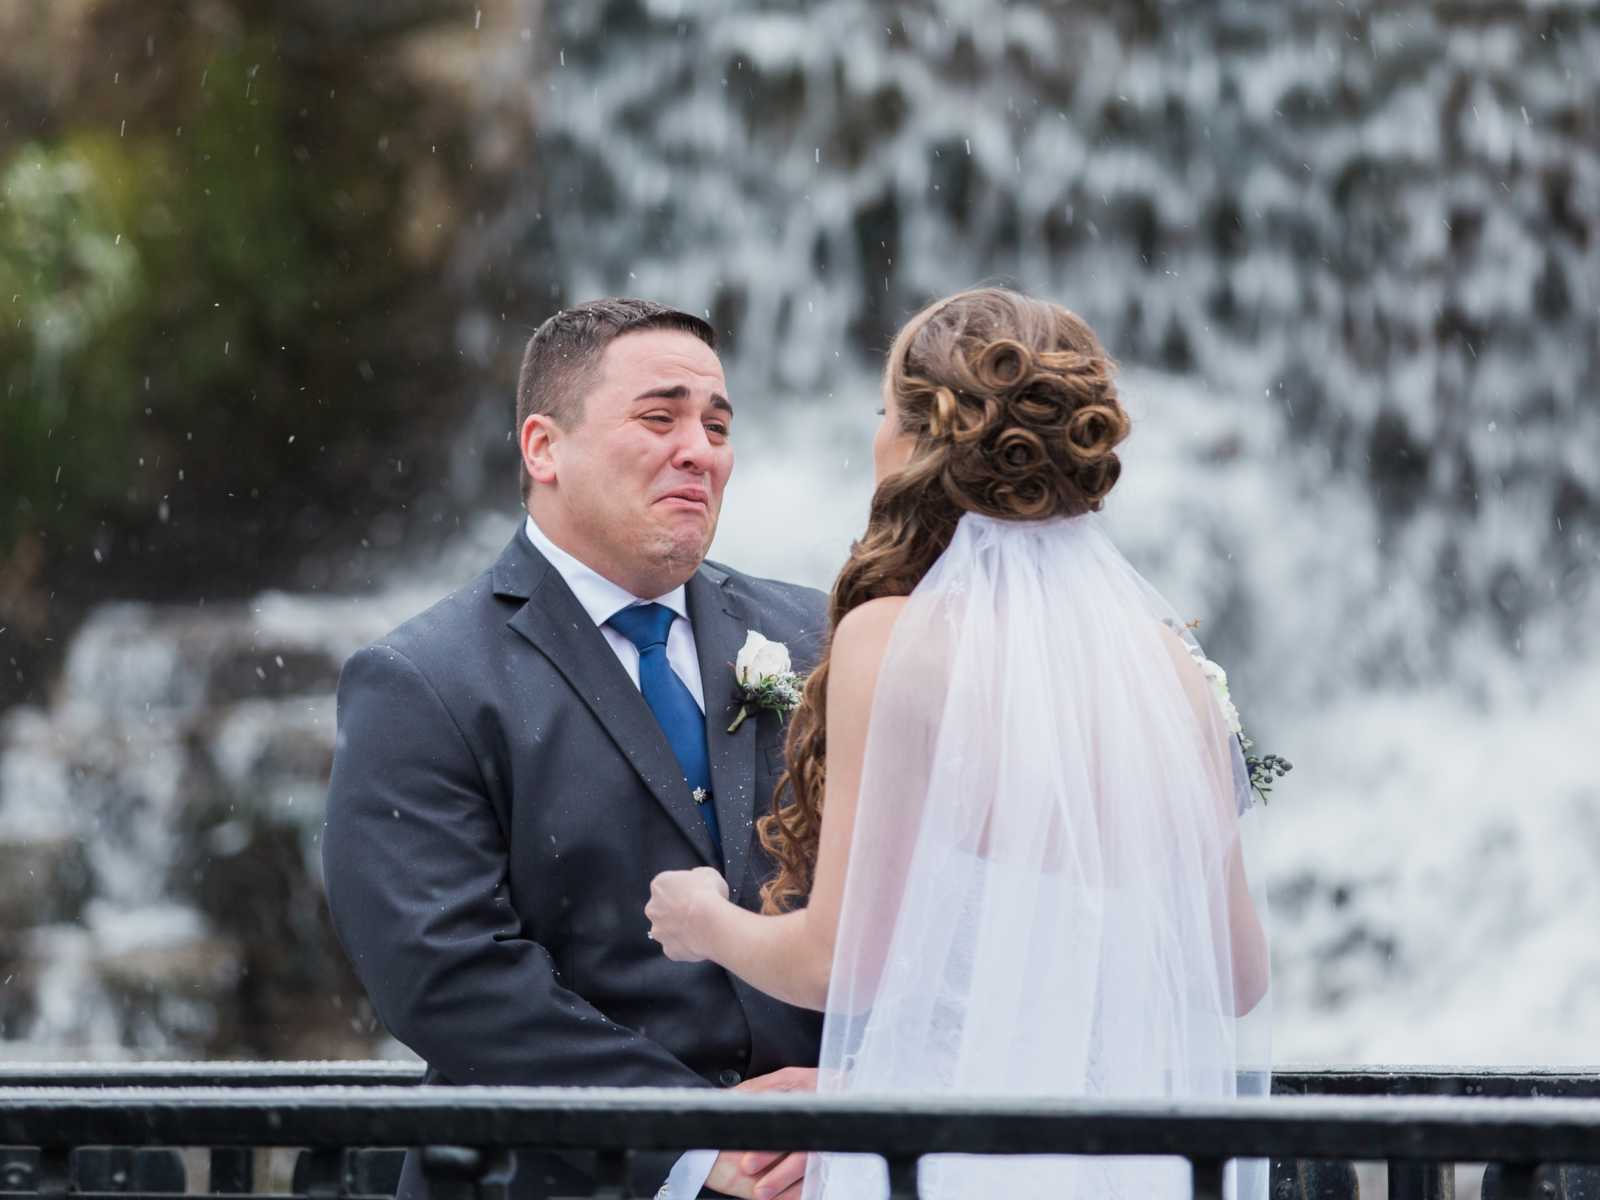 bride and groom face to face with tears coming out of grooms eyes